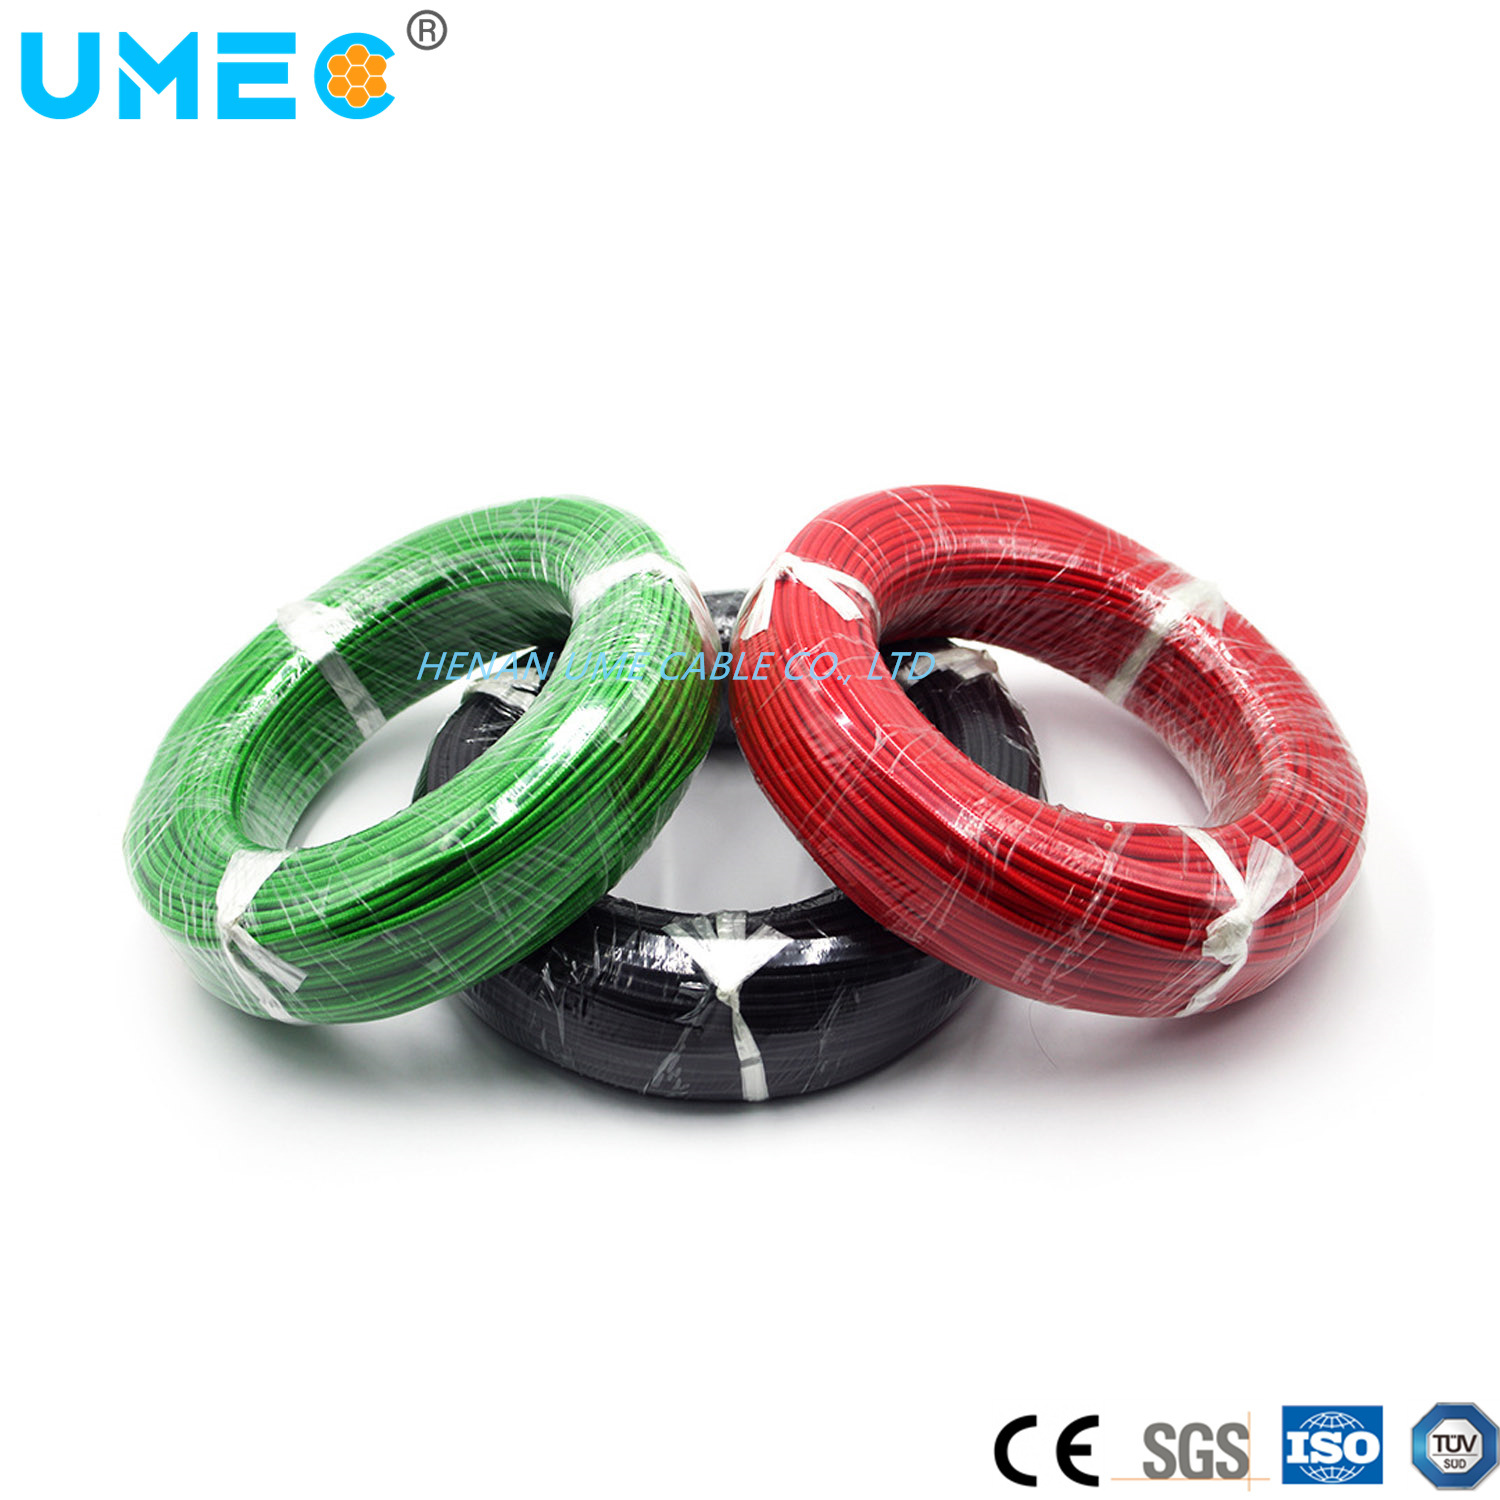 Heat 180 Sif/Gl Sif Silicone Insulated Wire with Fibreglass Braiding for Instruments Cable Wire